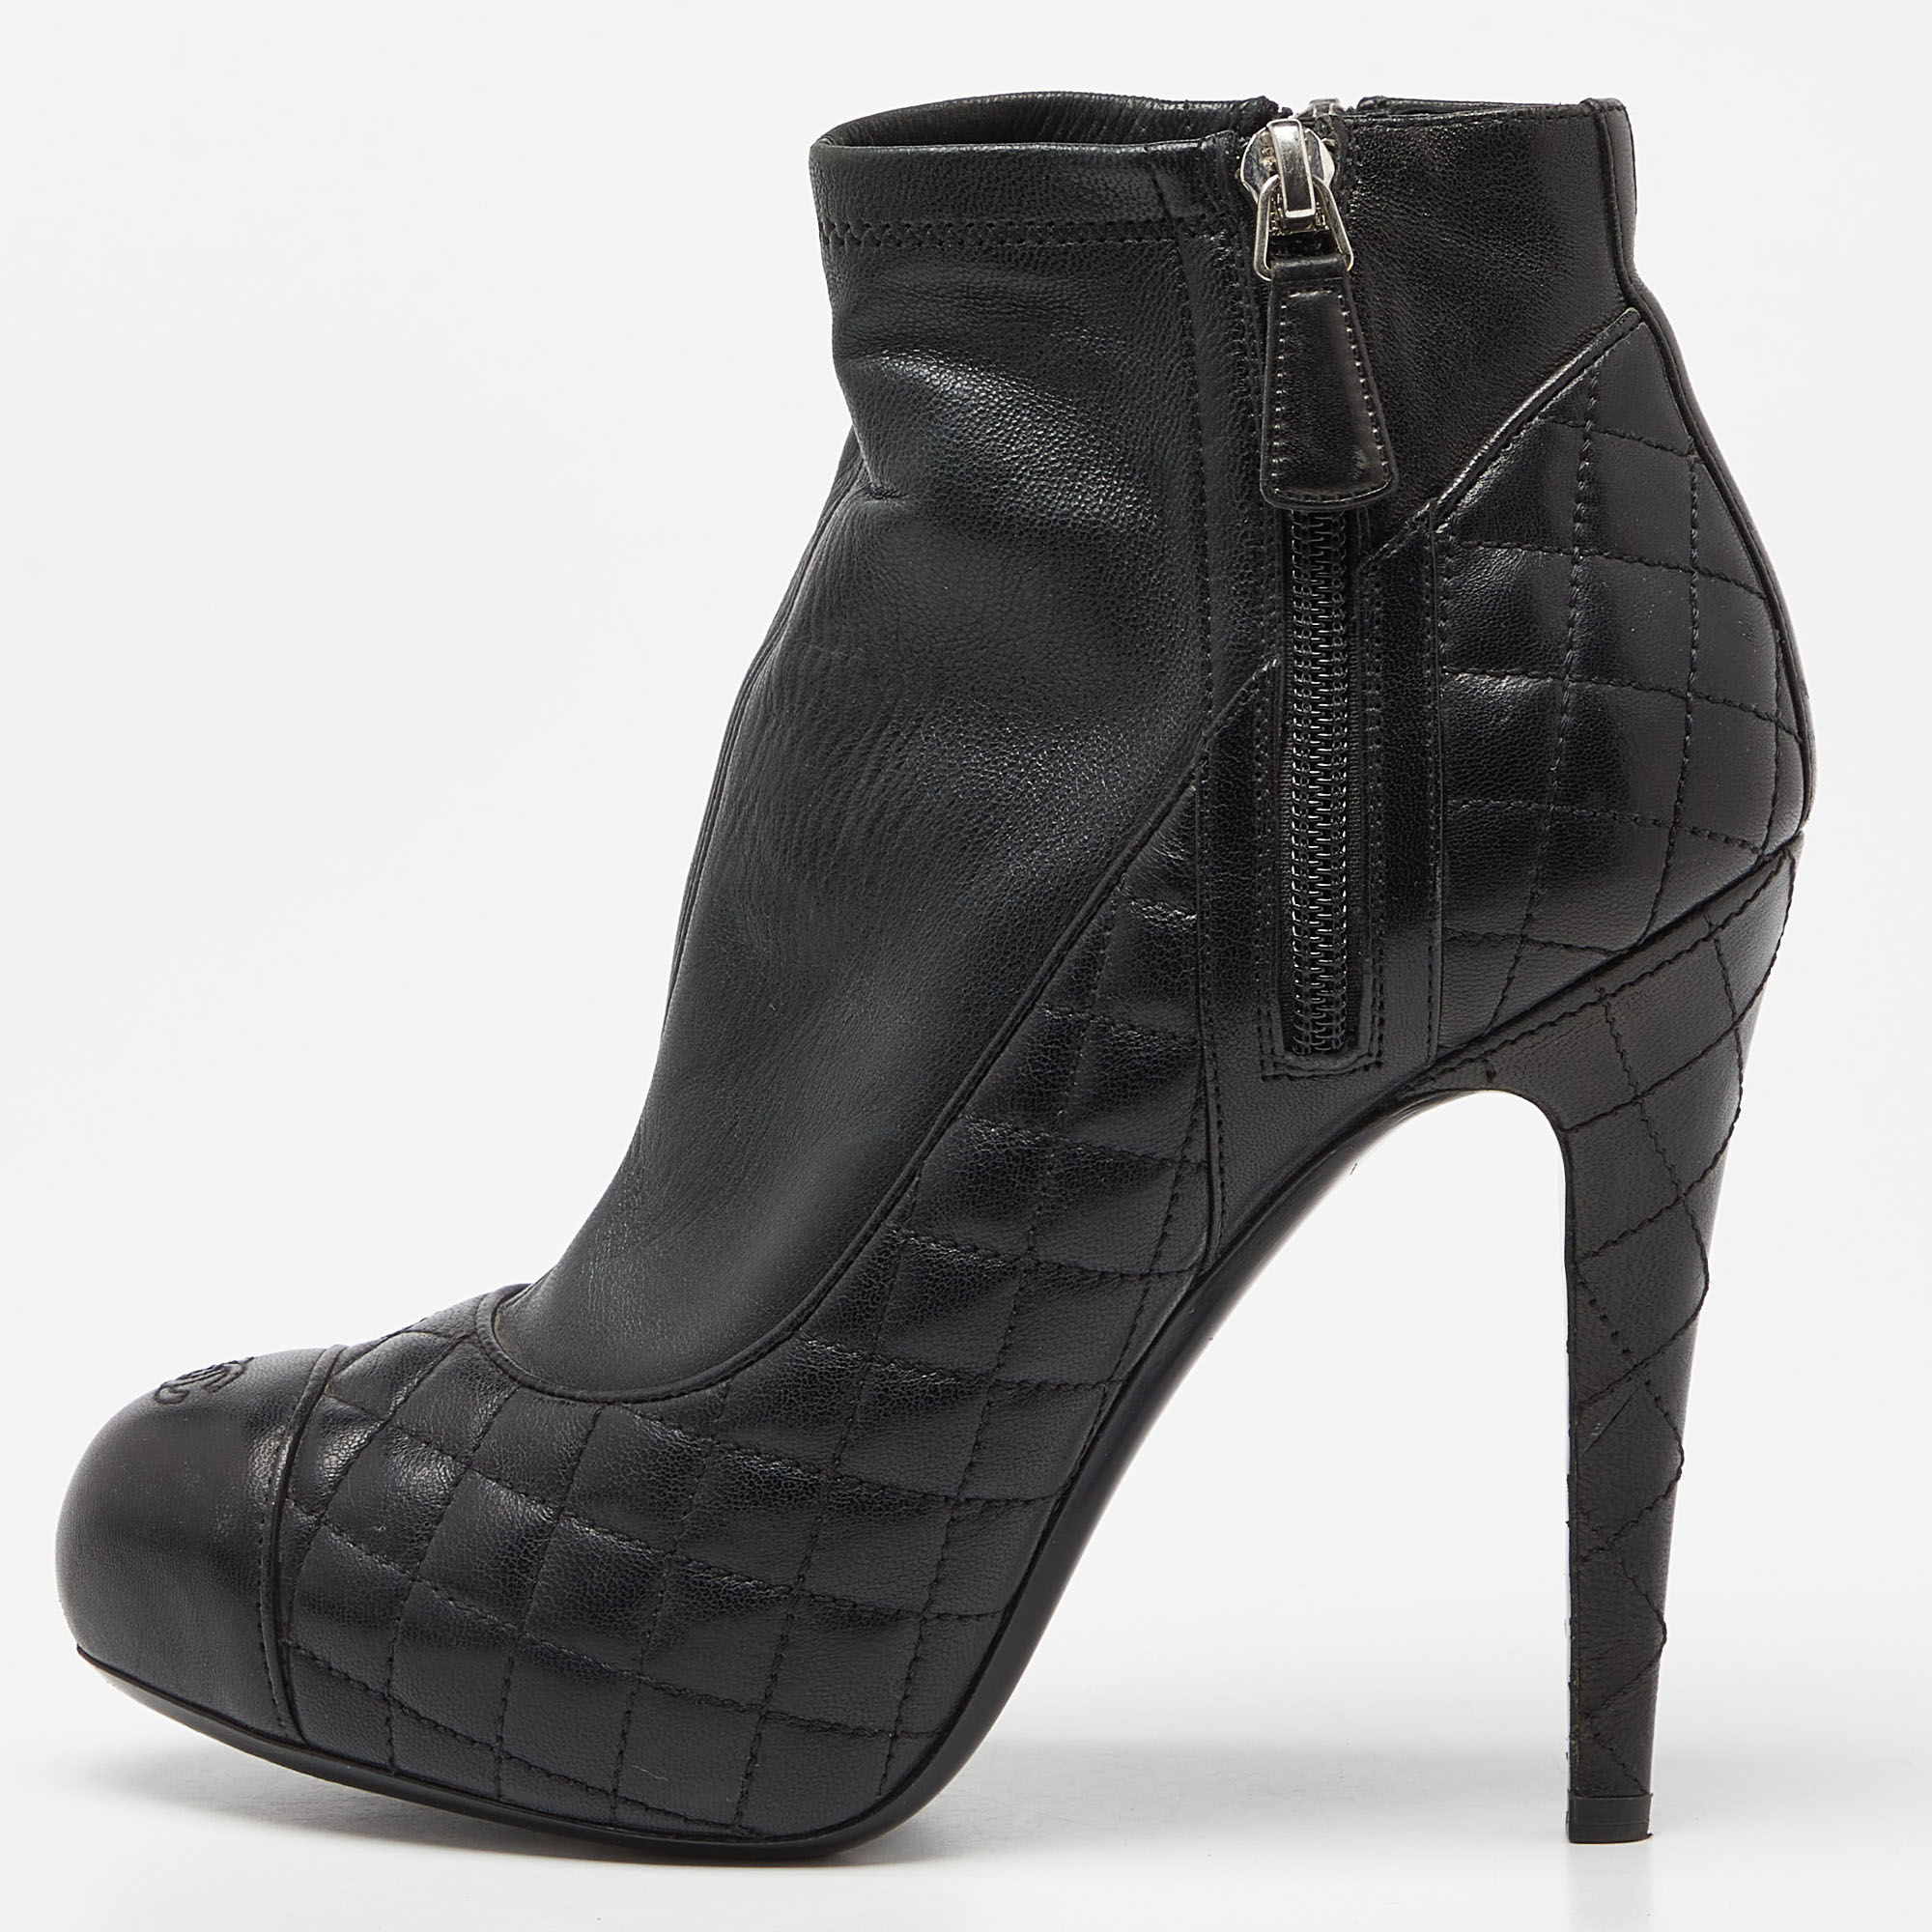 These ankle booties from Chanel are meant to be a loved choice. Wonderfully crafted and balanced on 12 cm heels the shoes will lift your feet in a stunning silhouette.